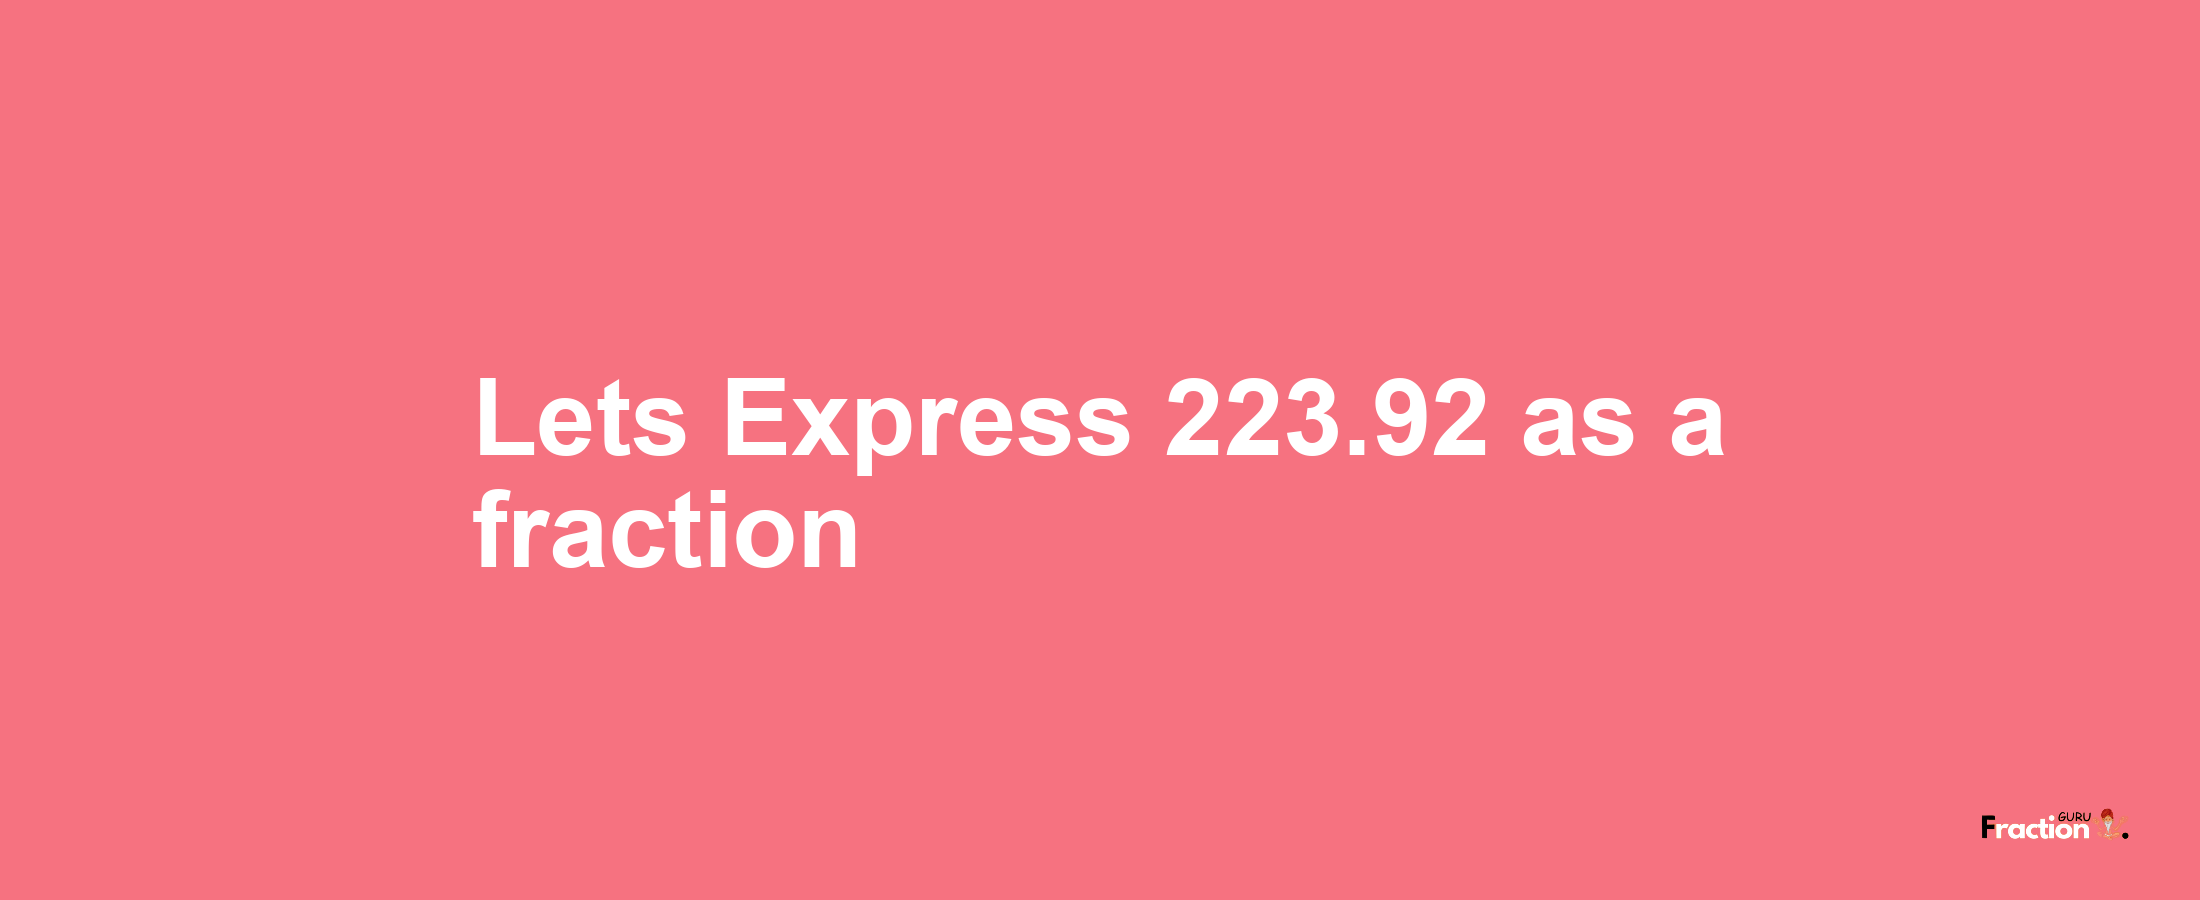 Lets Express 223.92 as afraction